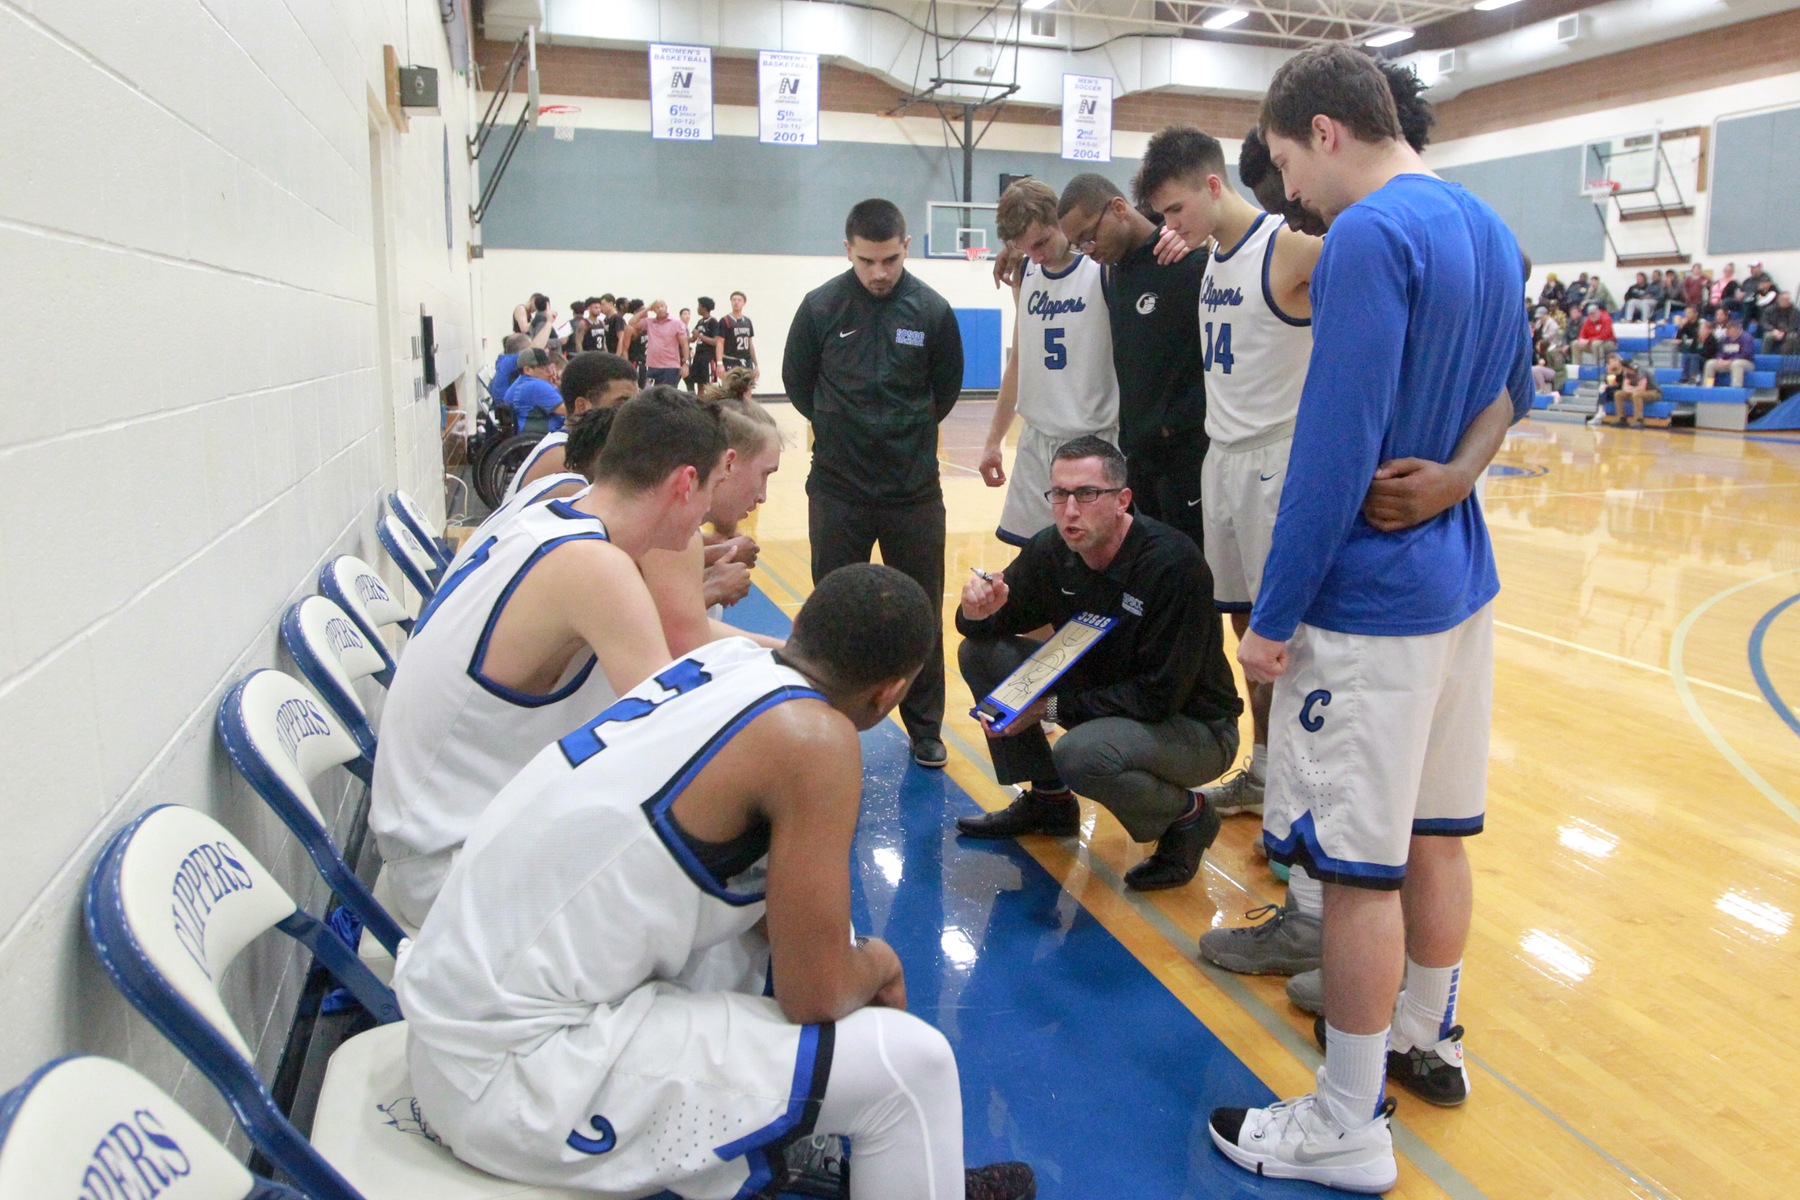 NWAC Men's Basketball Crossover Tournament coming to SPSCC